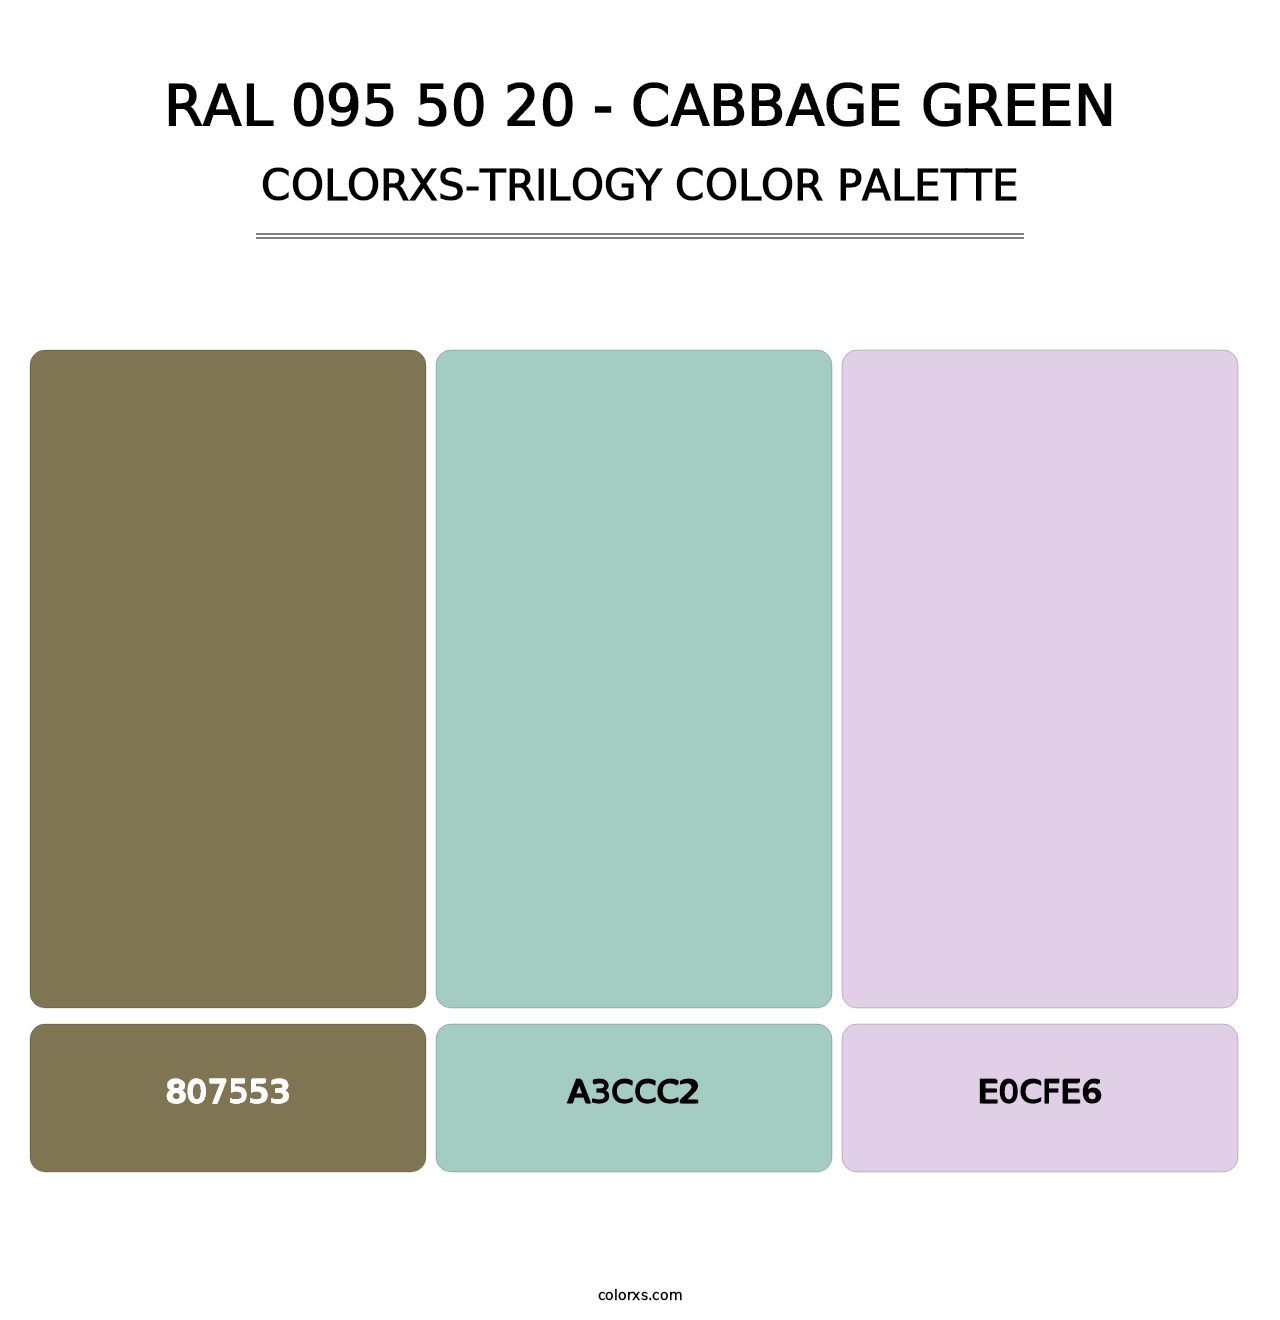 RAL 095 50 20 - Cabbage Green - Colorxs Trilogy Palette